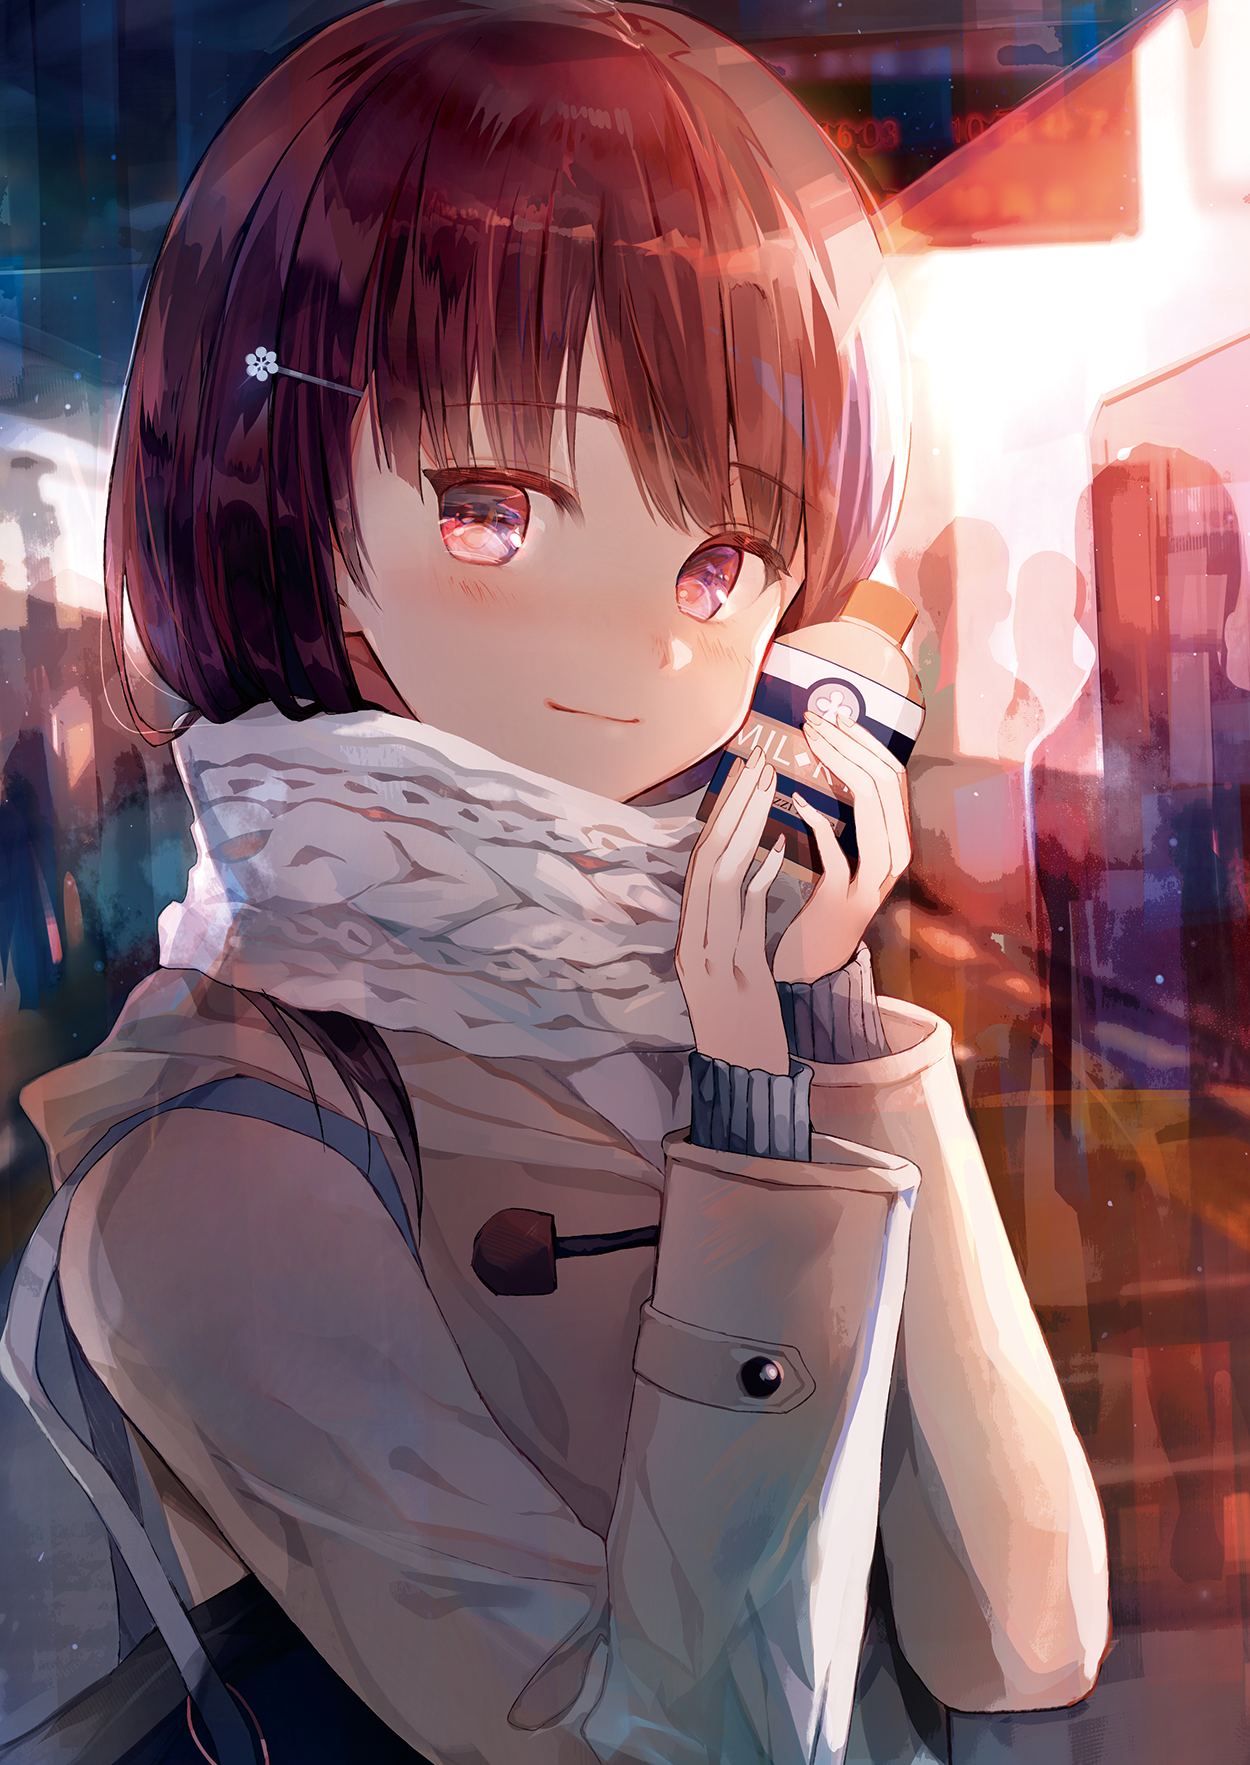 Anime 1250x1765 anime anime girls original characters brunette red eyes scarf Tlla